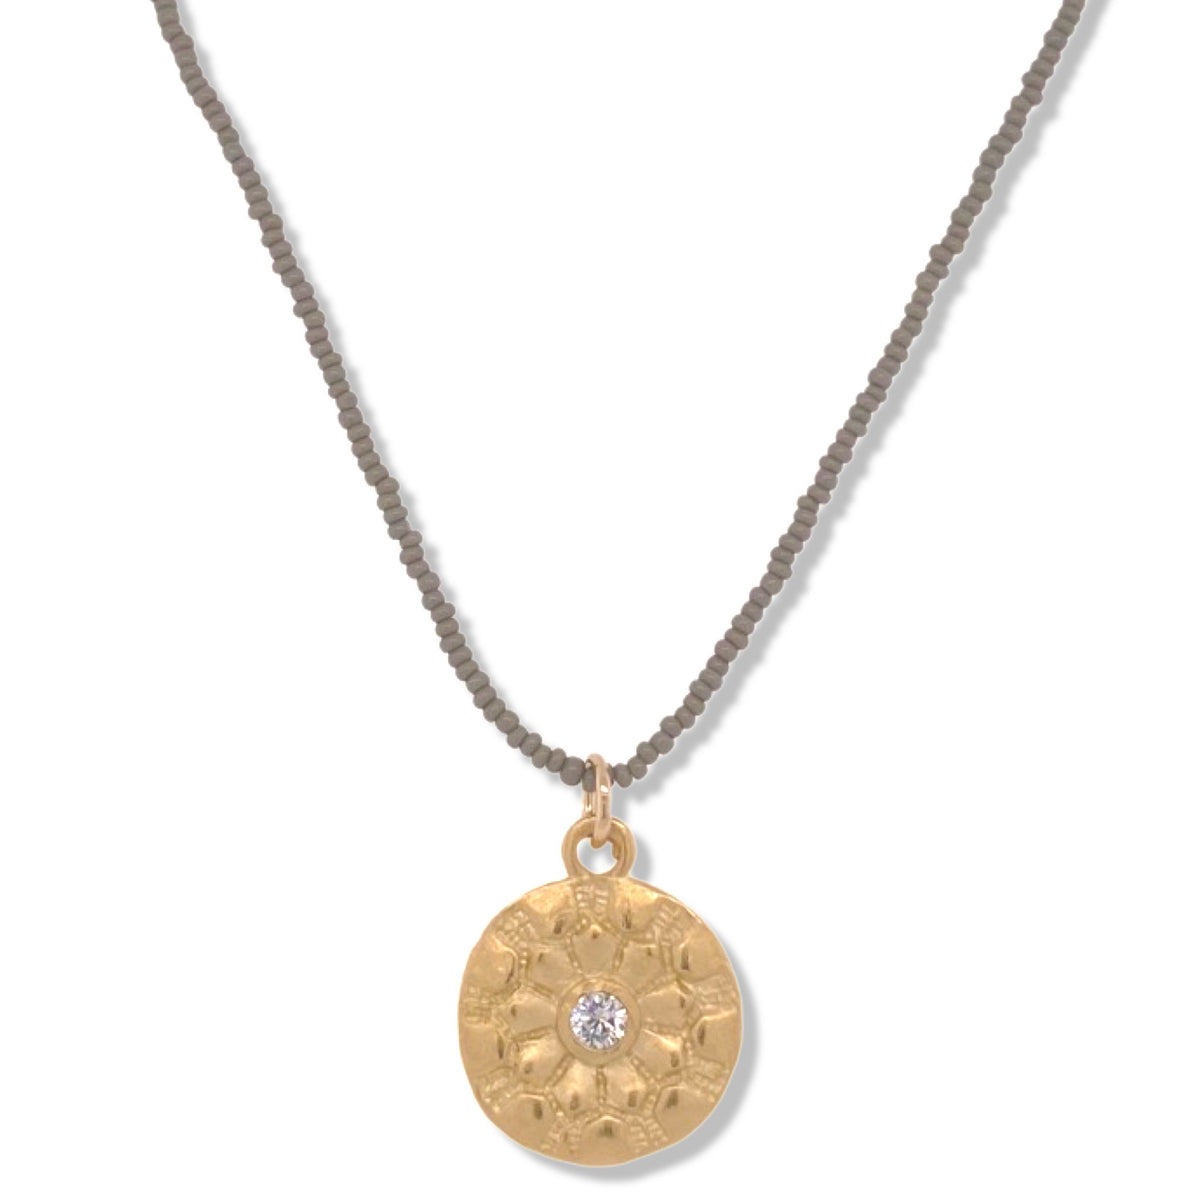 Mara Necklace in Gold on Charcoal Micro Beads | Keely Smith Jewelry | Nantucket